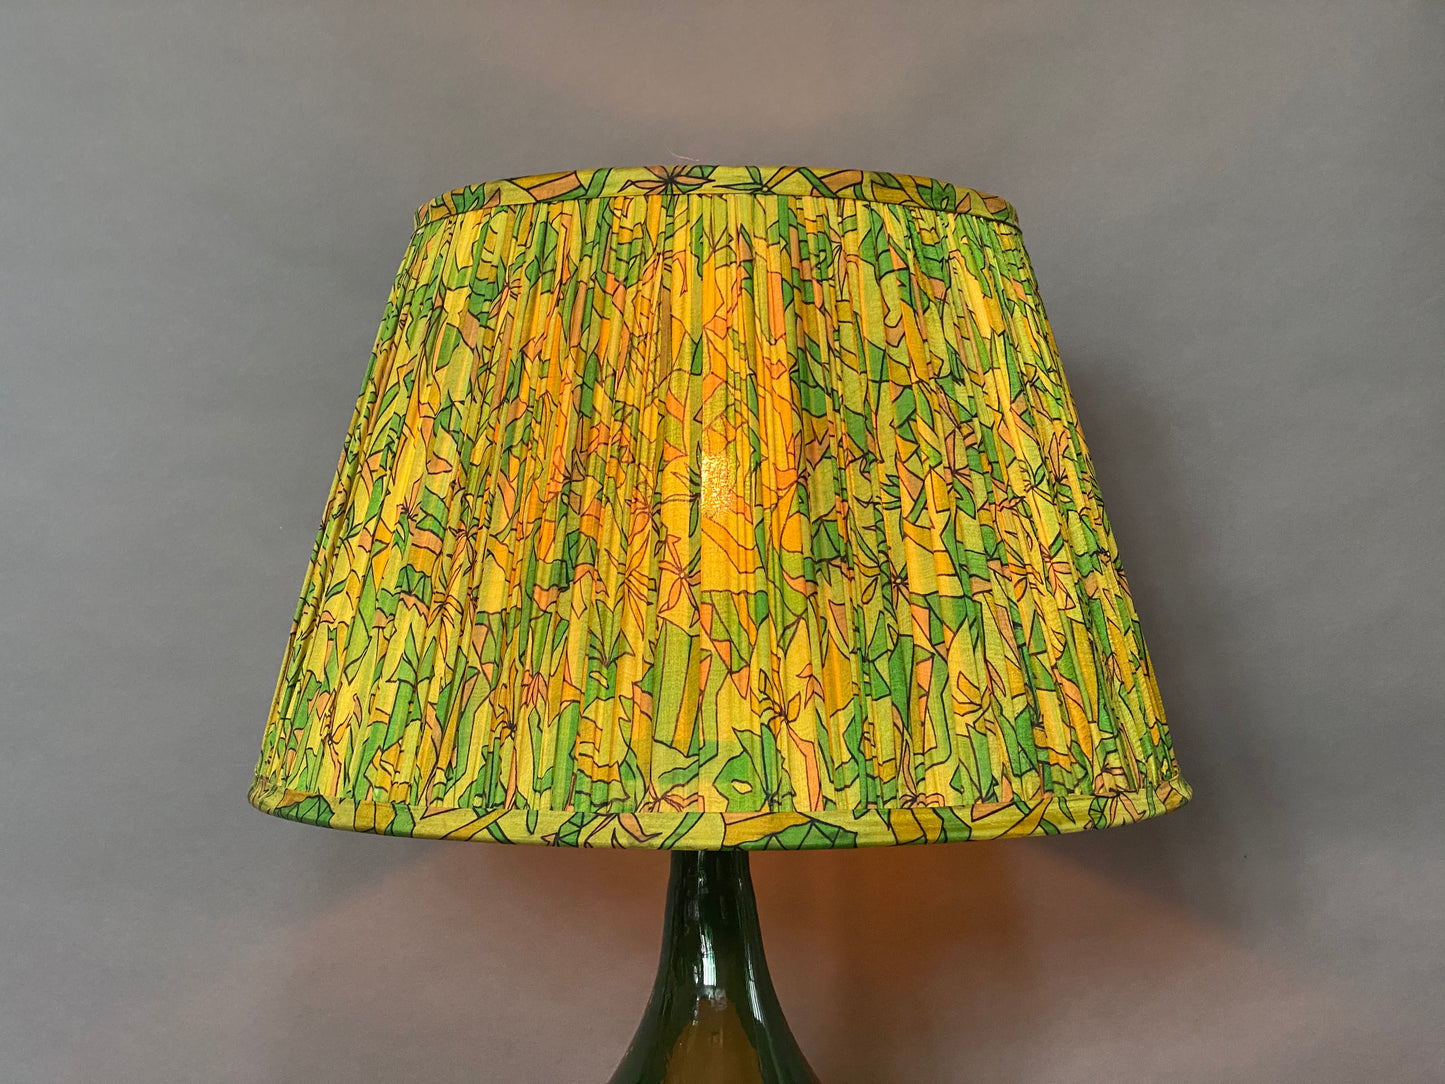 Green & citrine silk lampshade shown lit on a grey background